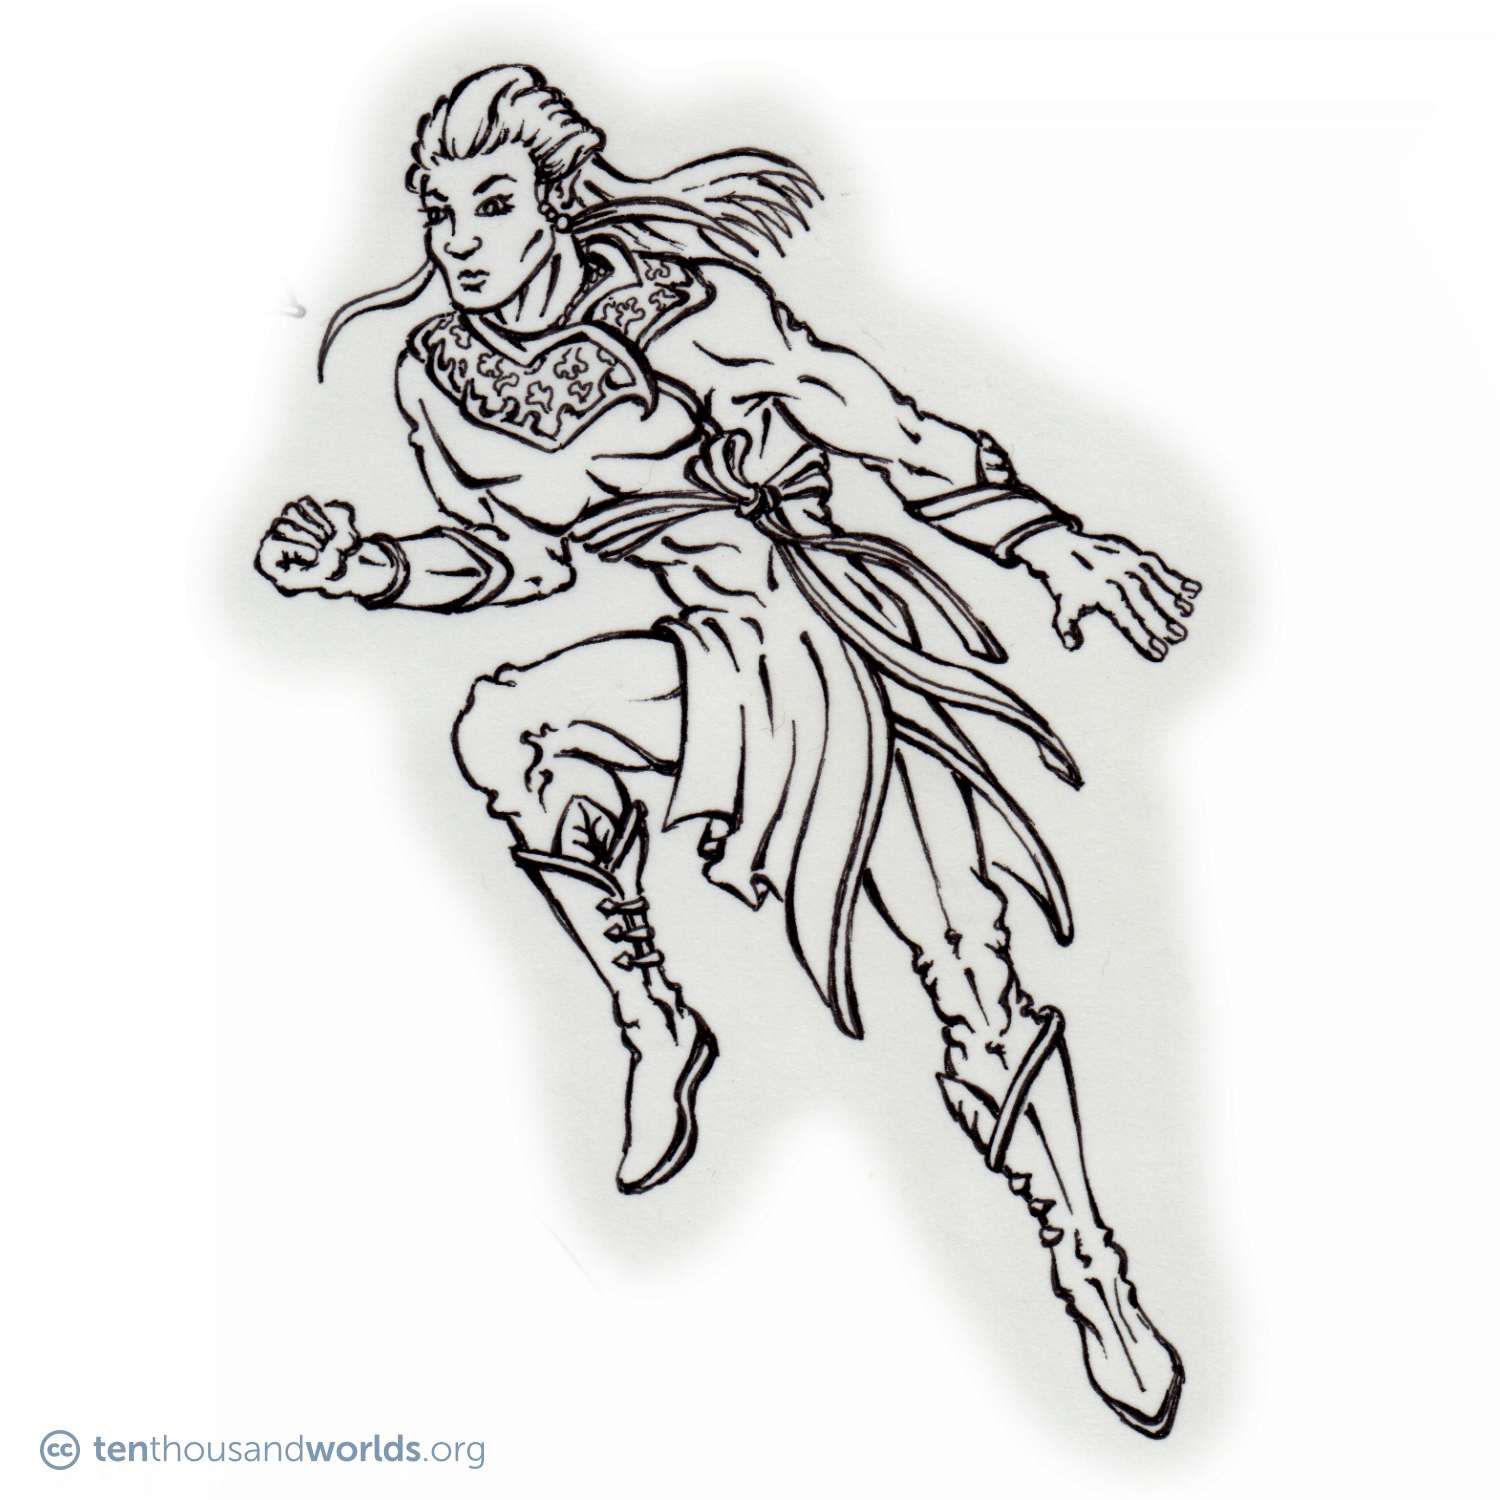 An ink outline of a human-like being with long flowing hair and pointed ears, wearing clothes decorated in plant motifs, leaping into action.